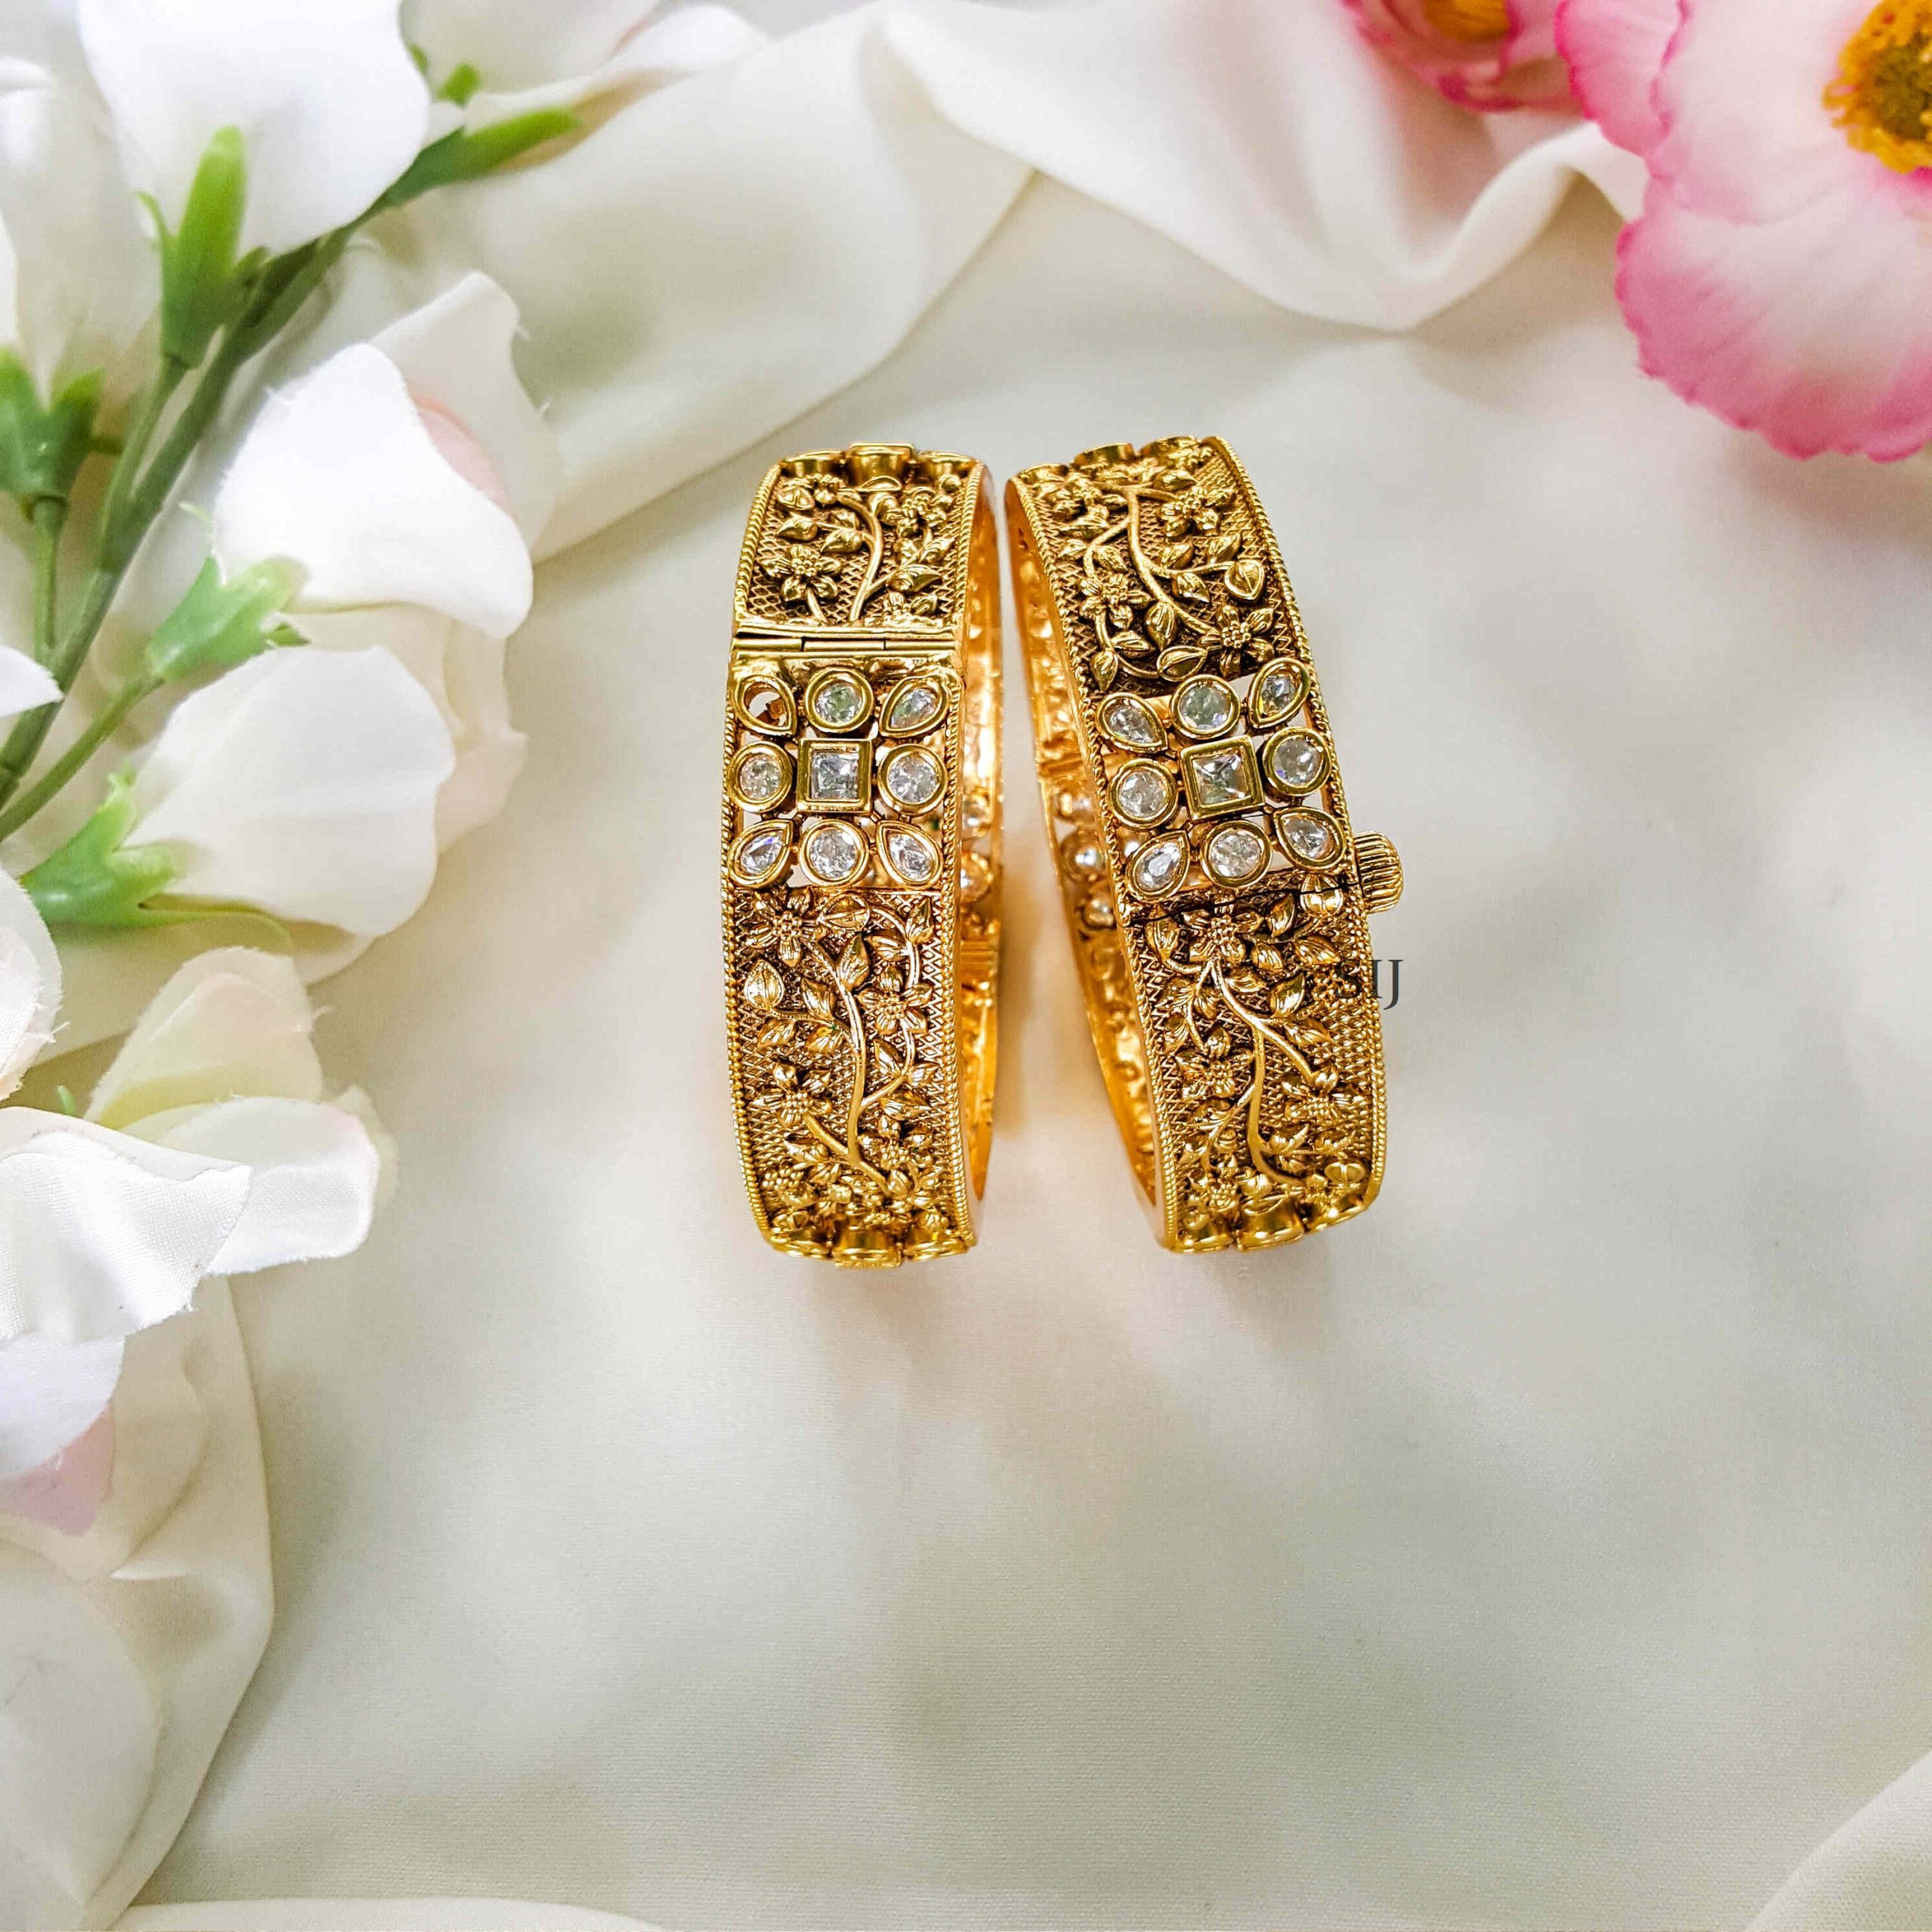 Stunning Floral Crafted AD Stone Openable Bangles